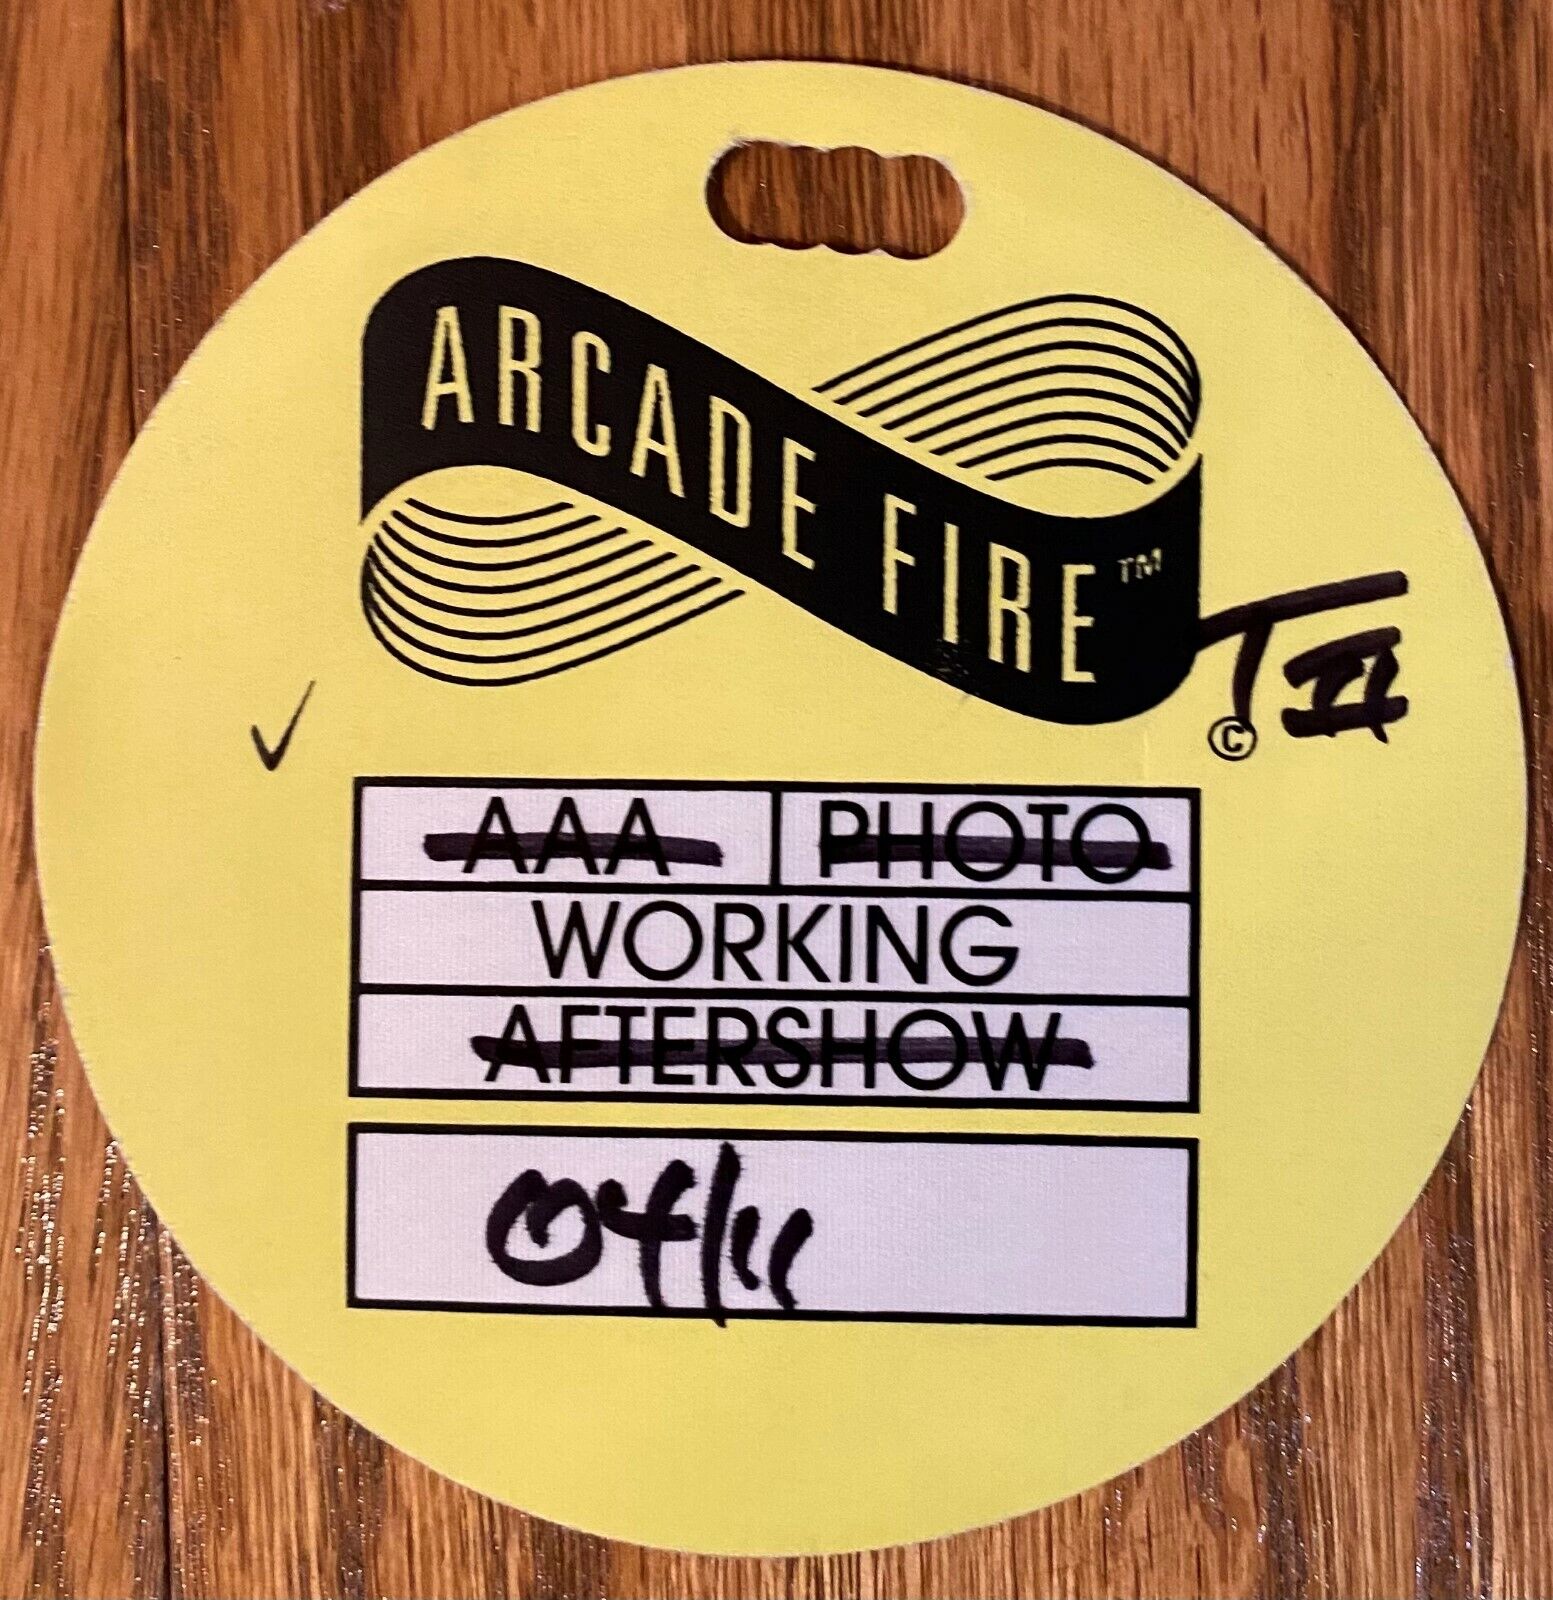 Arcade Fire Tour All Access Pass Toronto Air Canada Center Look Selling Others